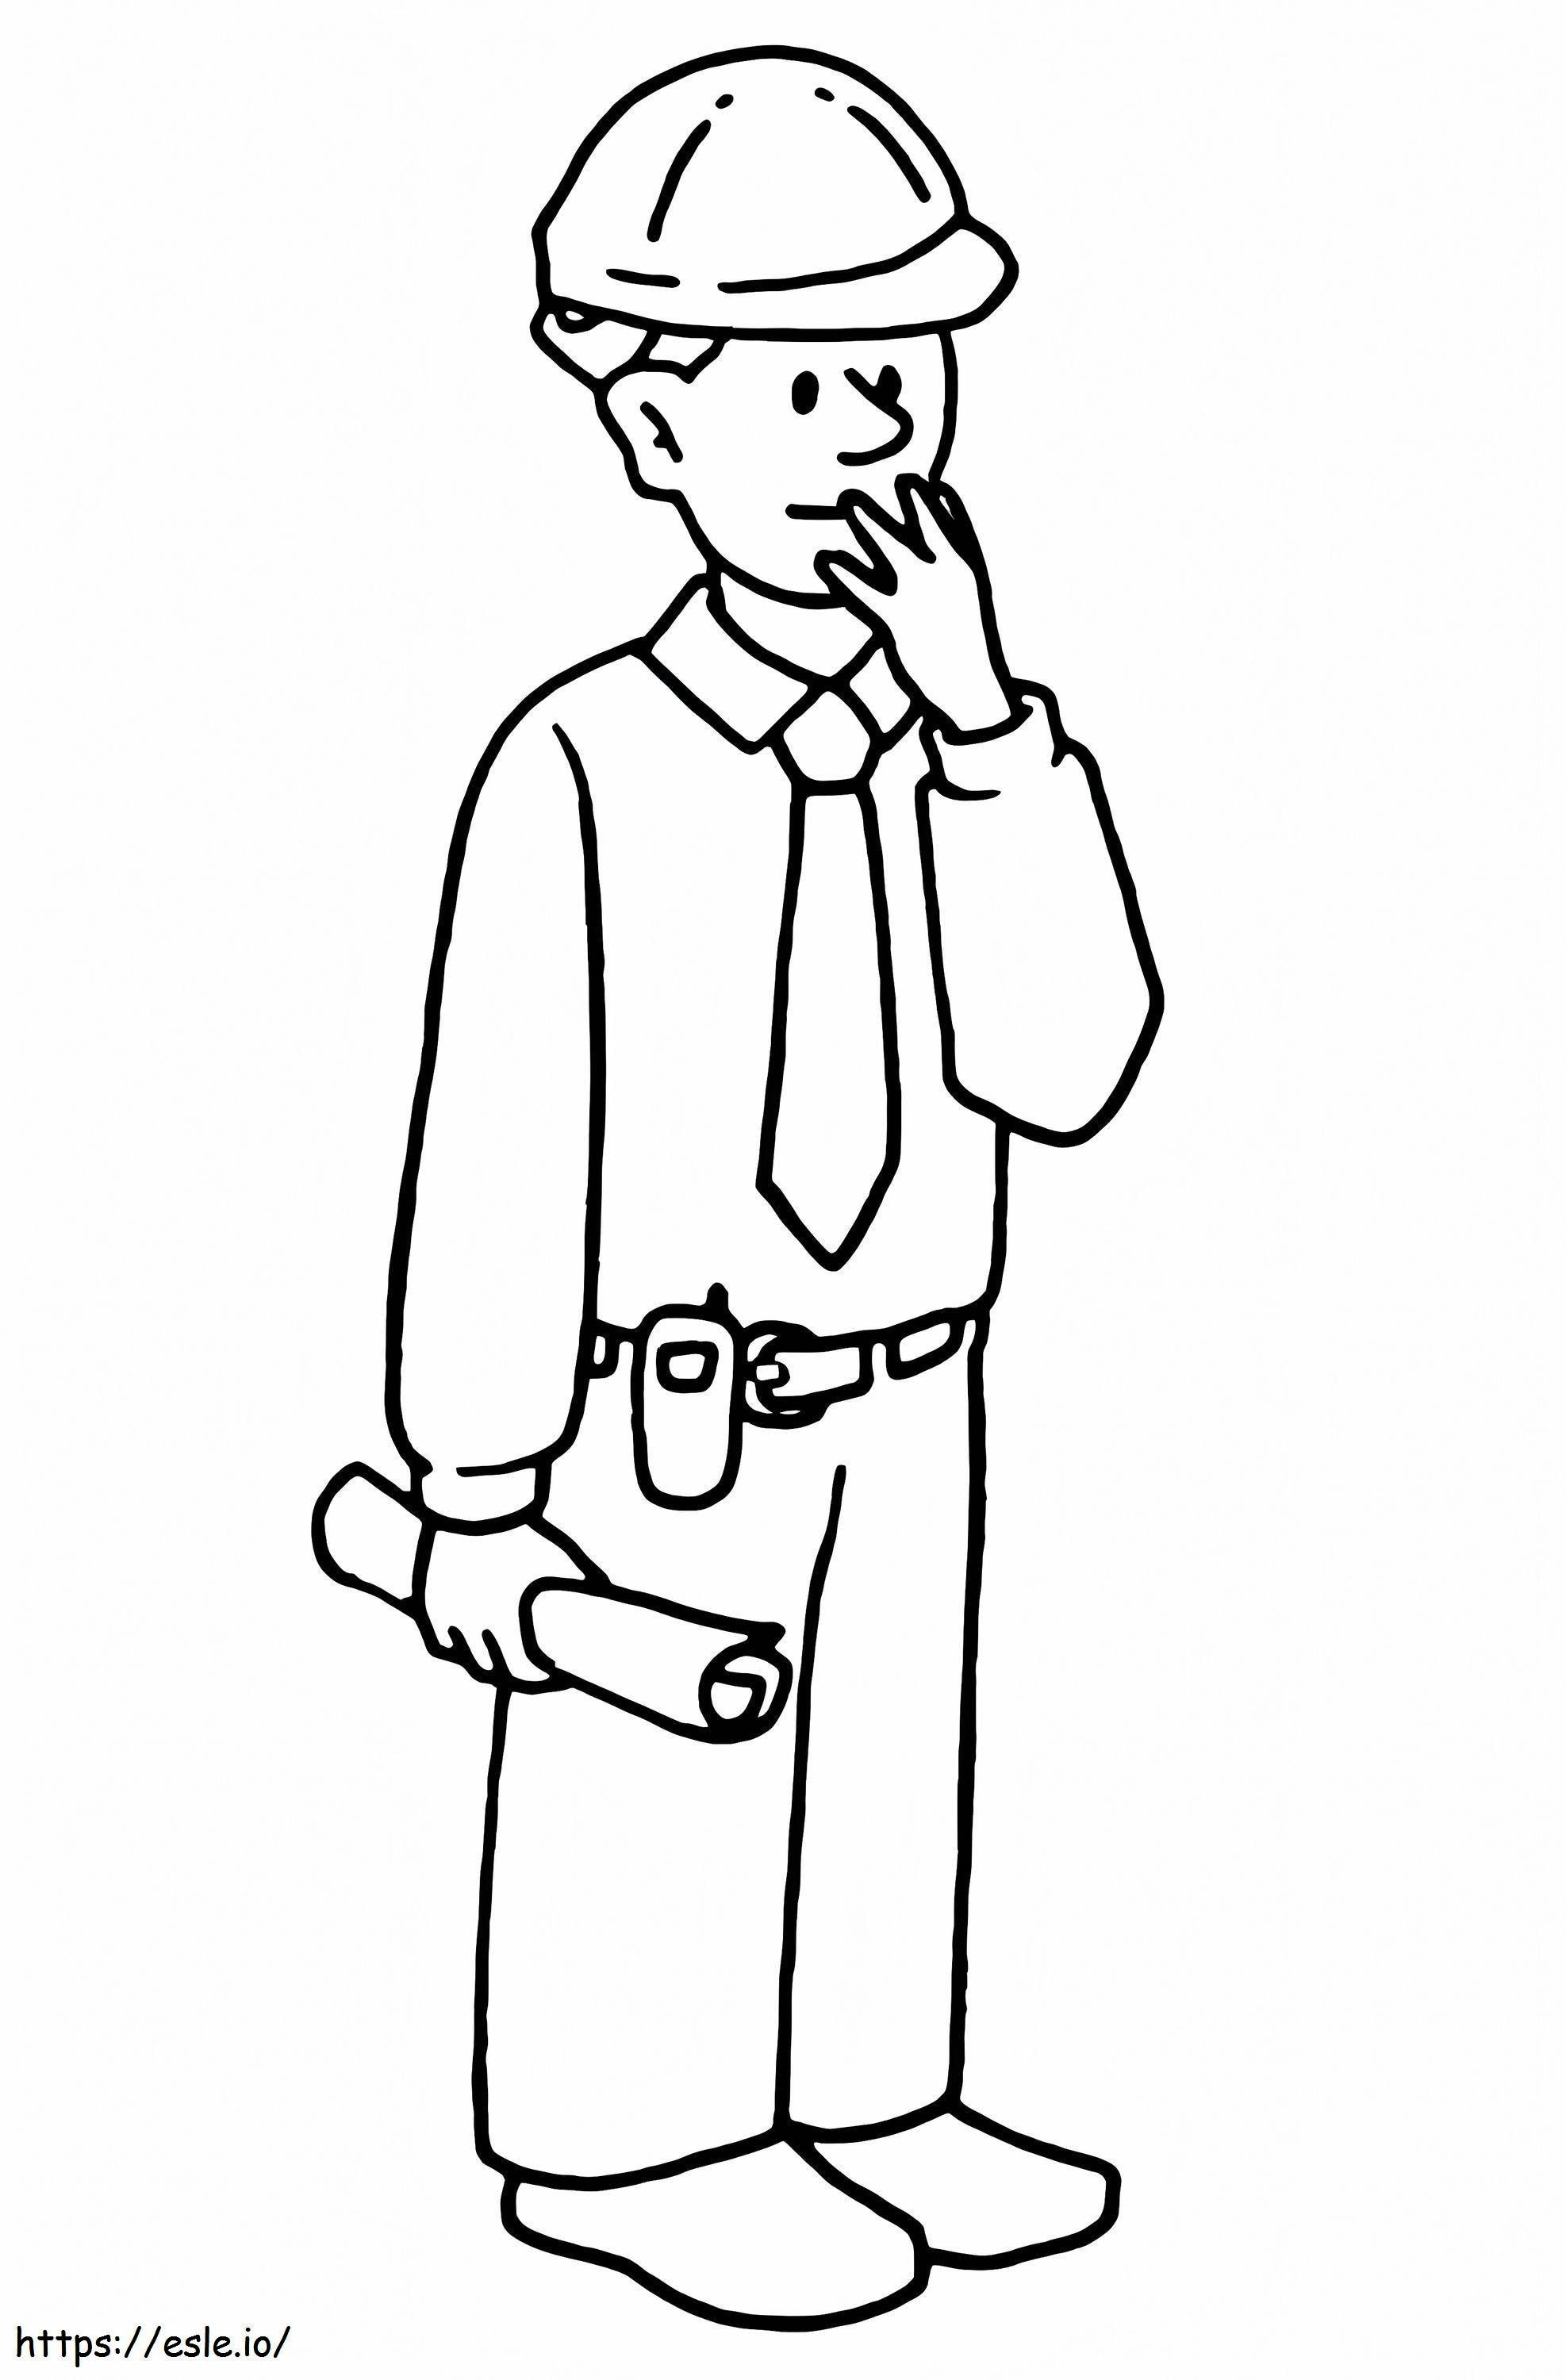 Engineer 6 coloring page